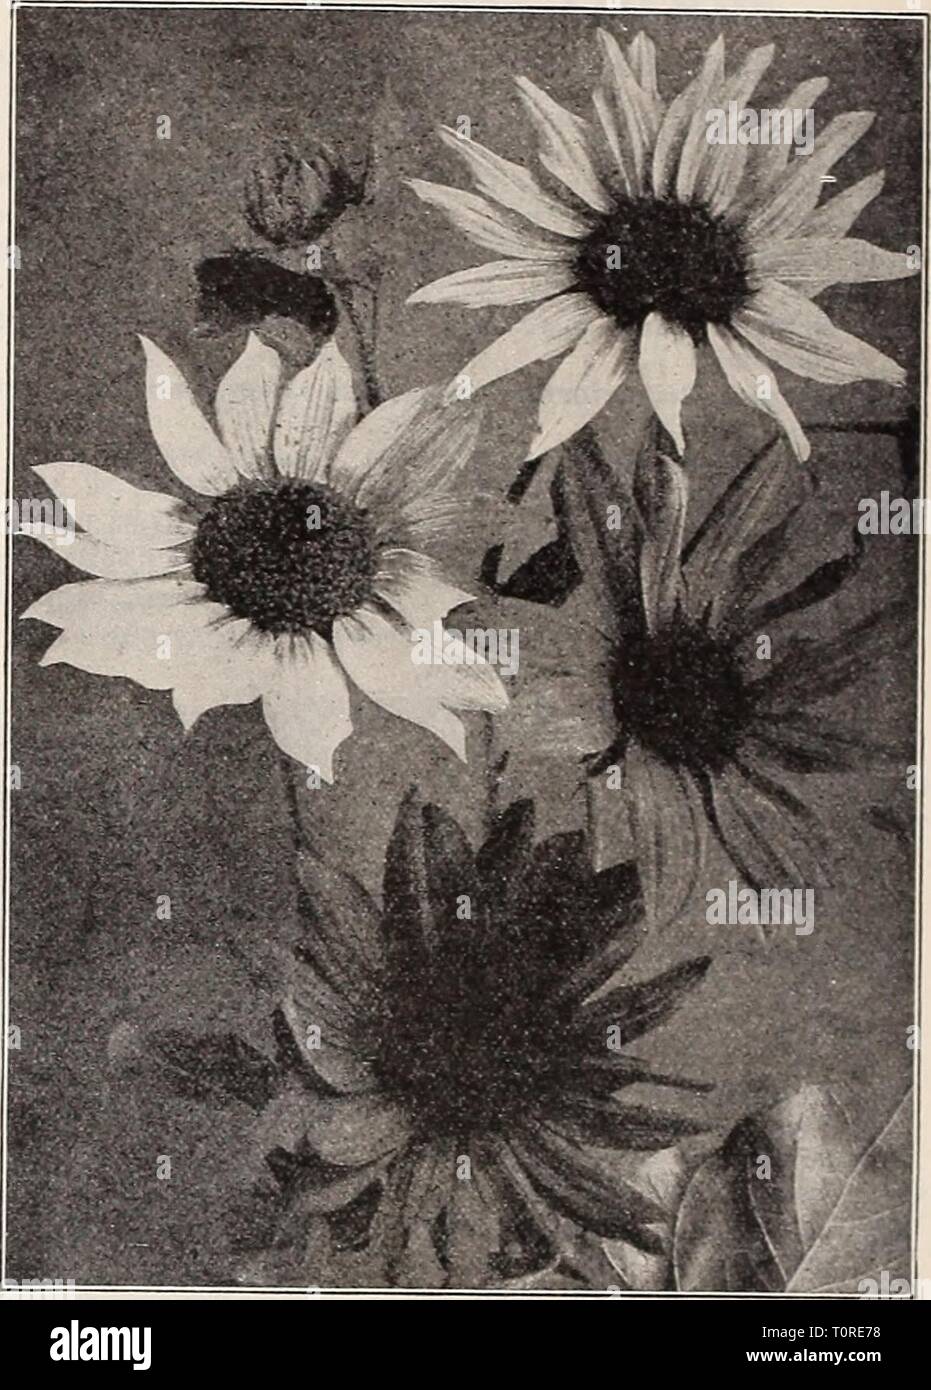 Dreer's 1909 garden book (1909) Dreer's 1909 garden book  dreers1909garden1909henr Year: 1909  88 IHHWfADBm-IHIIADtLPHIA-M-^f RELIABLE FLOWER SEE PS HELIANTHUS (Sunnowe,-, Remarkable for the stately growth, size and brilliancy ol their flowers, making a very good effect among shrubbery and for screens. SINGLE SUNFLOWERS. The single Sunflowers are indispensable for cutting. Sown on a sunny spot in April or May they come into bloom early in summer, and keep up a constant supply of flowers until cut down by frost. (See cut.) pEit pKT 2701 Cucumerifolius {Miniature Sunflower). Small, single rich y Stock Photo